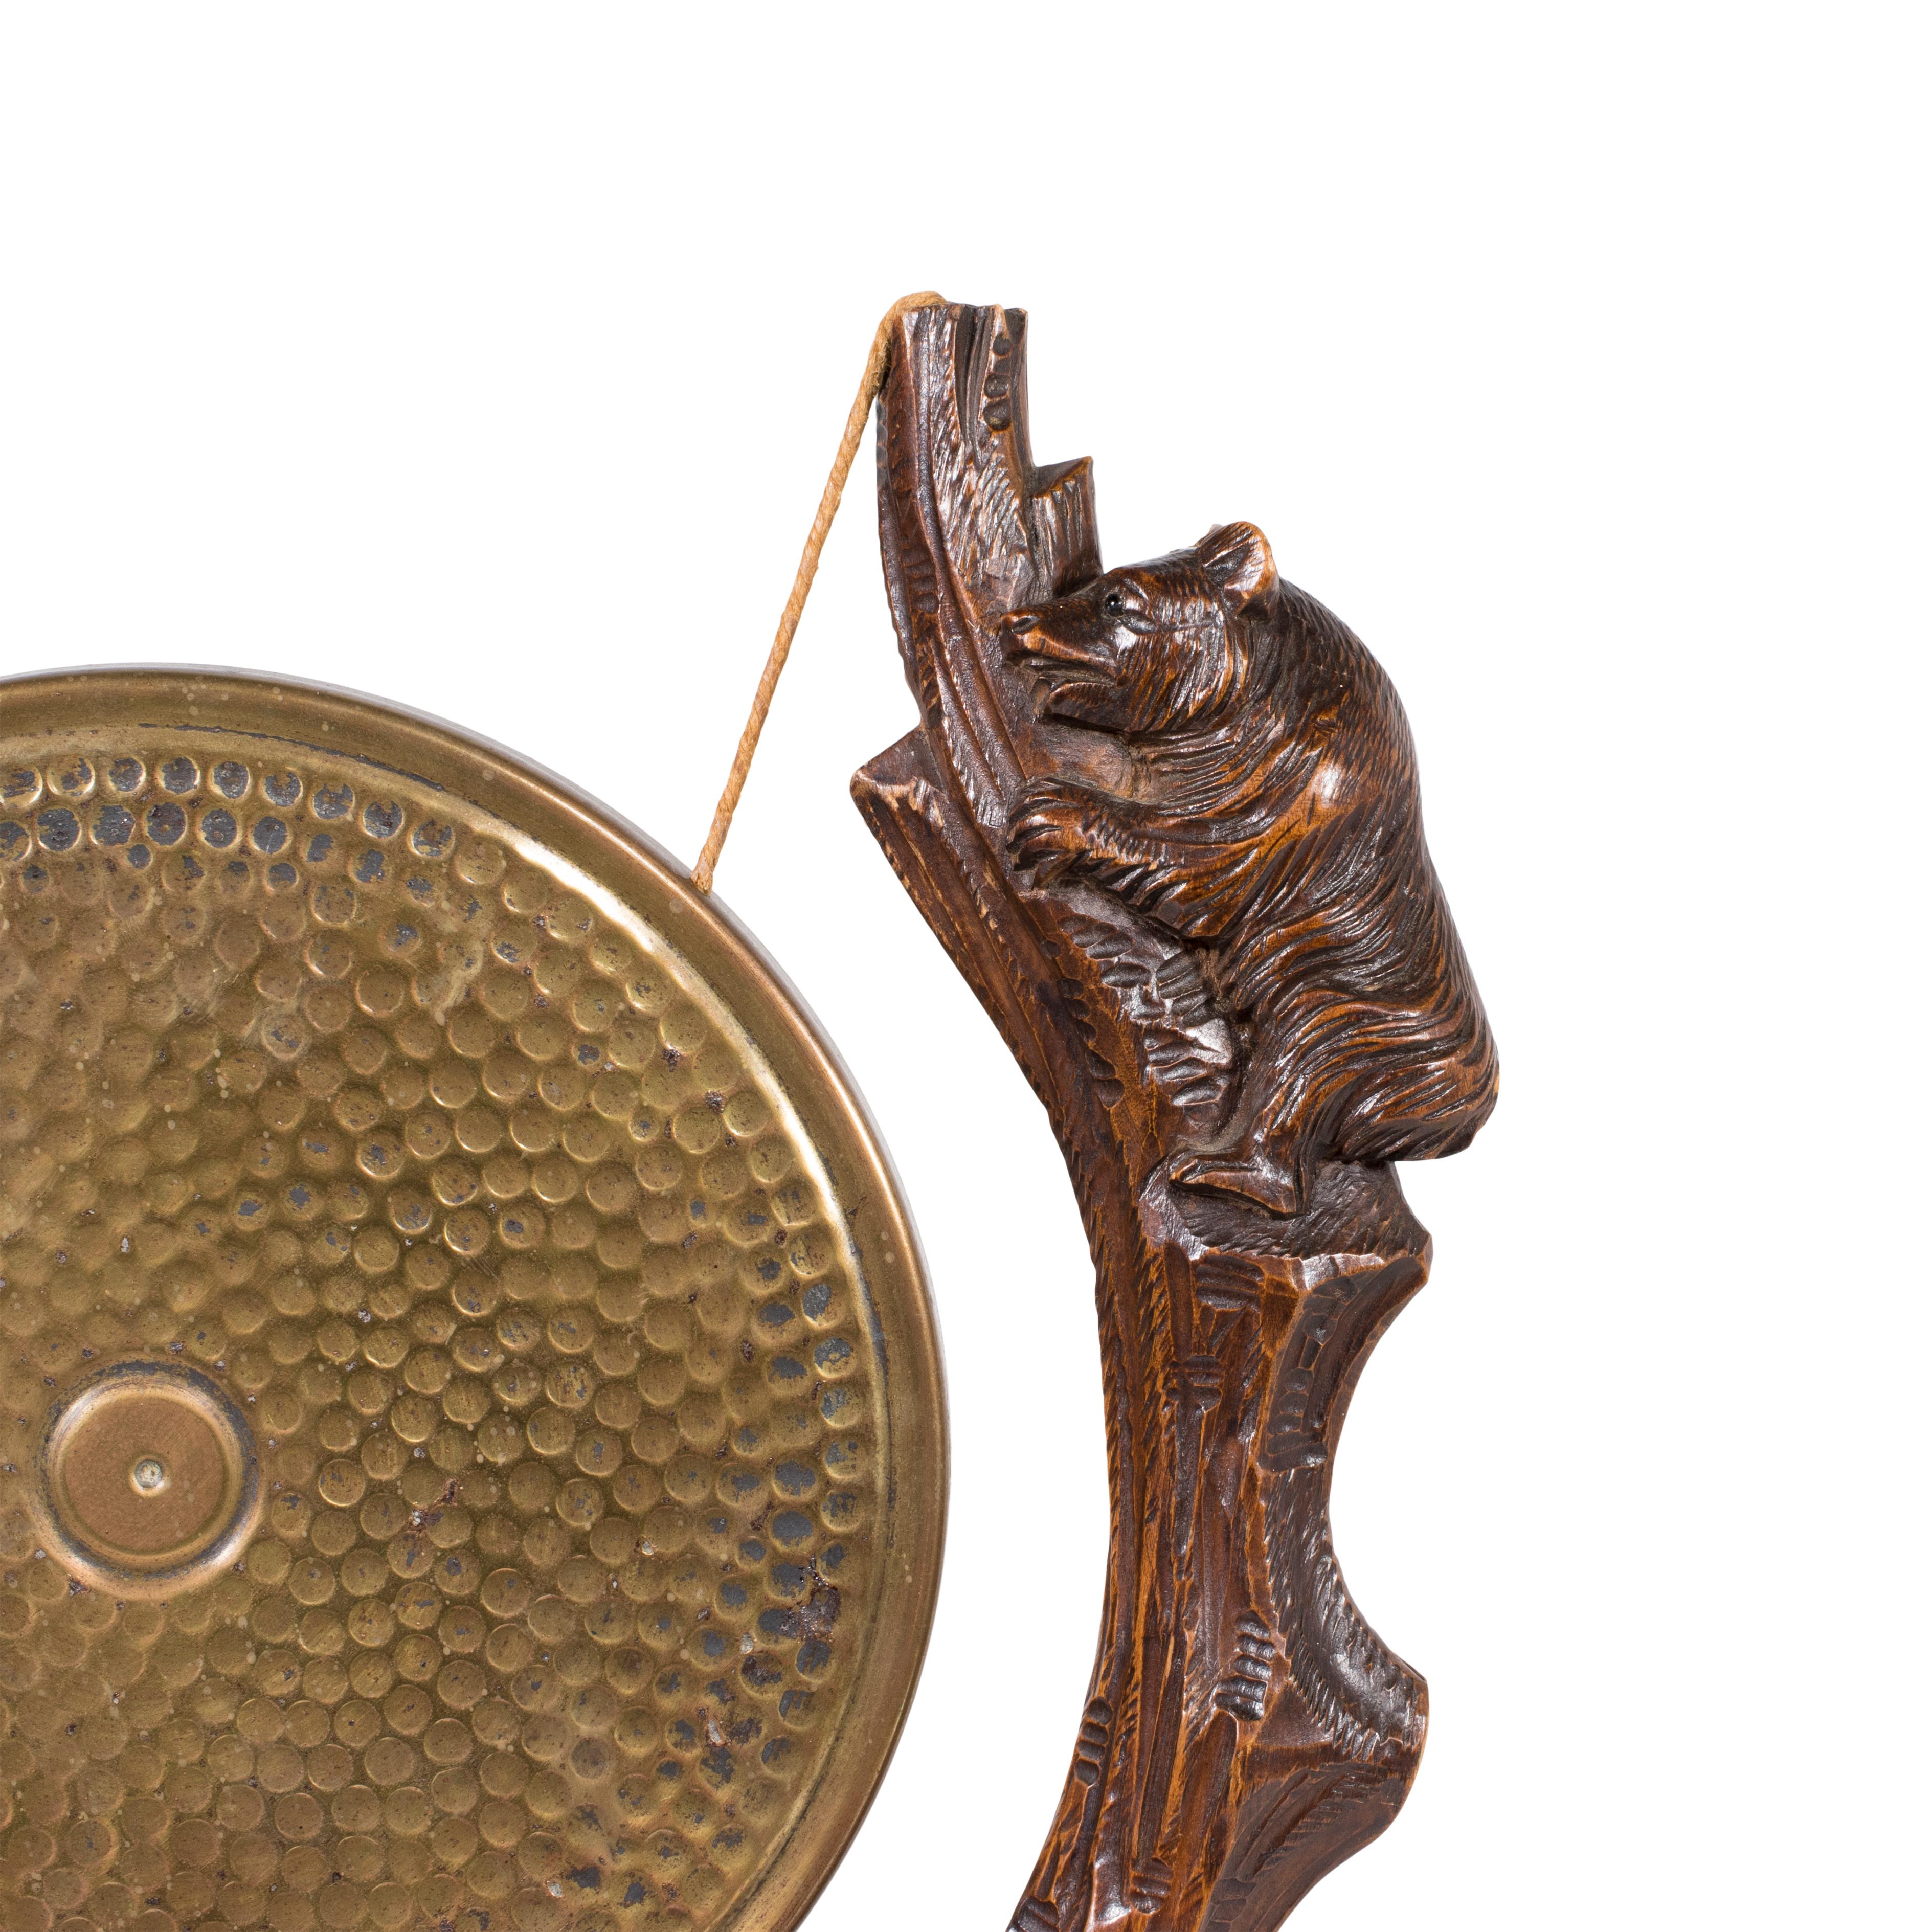 19th century Swiss Black Forest carved brass dinner gong suspended by two trees each having a carved climbing bear. Very neat and unique piece of Black Forest work. Genuine and authentic. 

Period: First quarter 19th century

Origin: Swiss

Size: